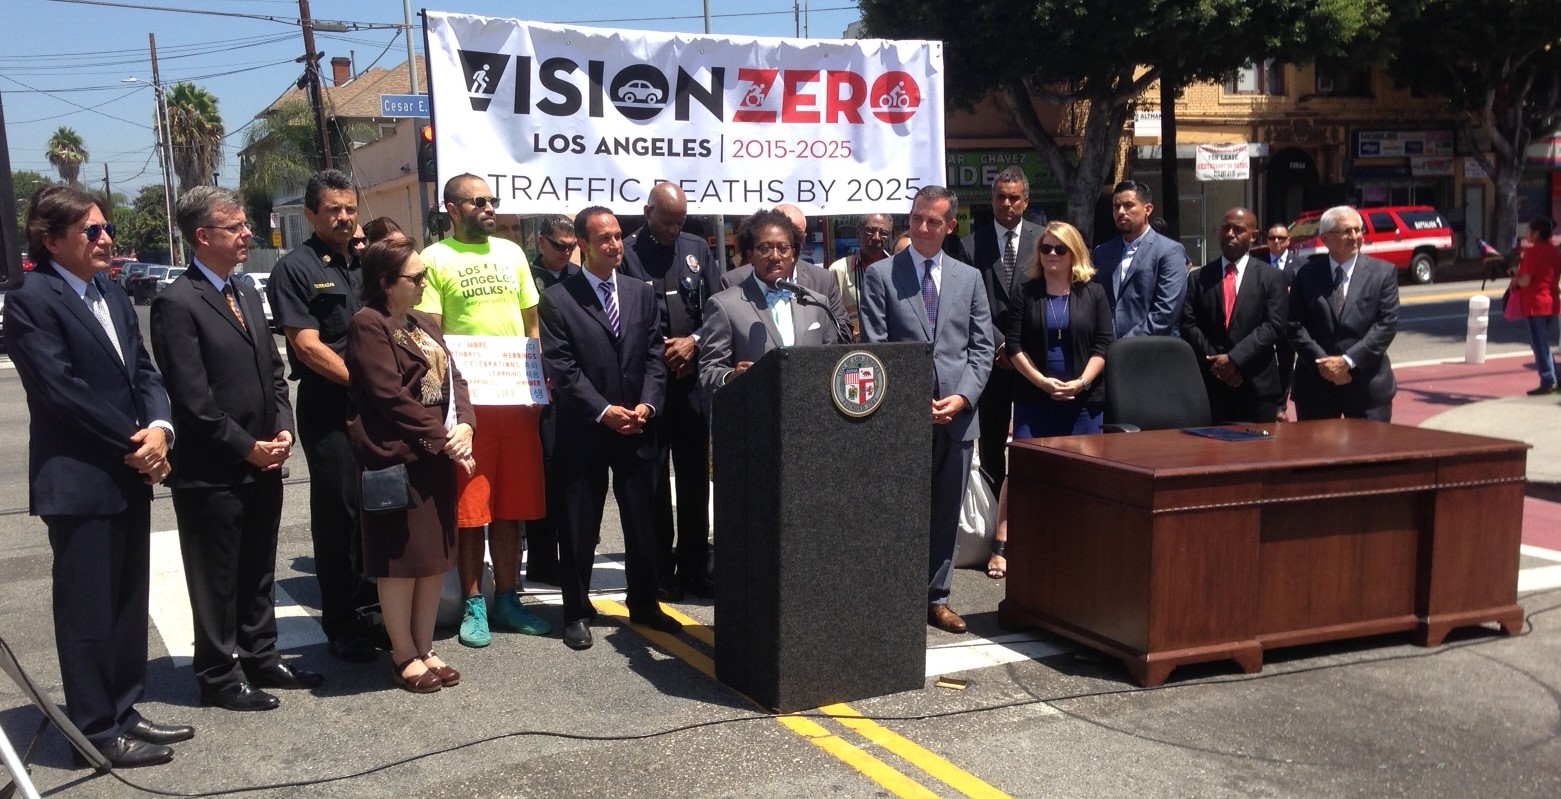 Los Angeles County Bicycle Coalition Executive Director Tamika Butler speaks on Los Angeles' new Vision Zero policy at today's signing ceremony in Boyle Heights. Photo: Joe Linton/Streetsblog L.A.